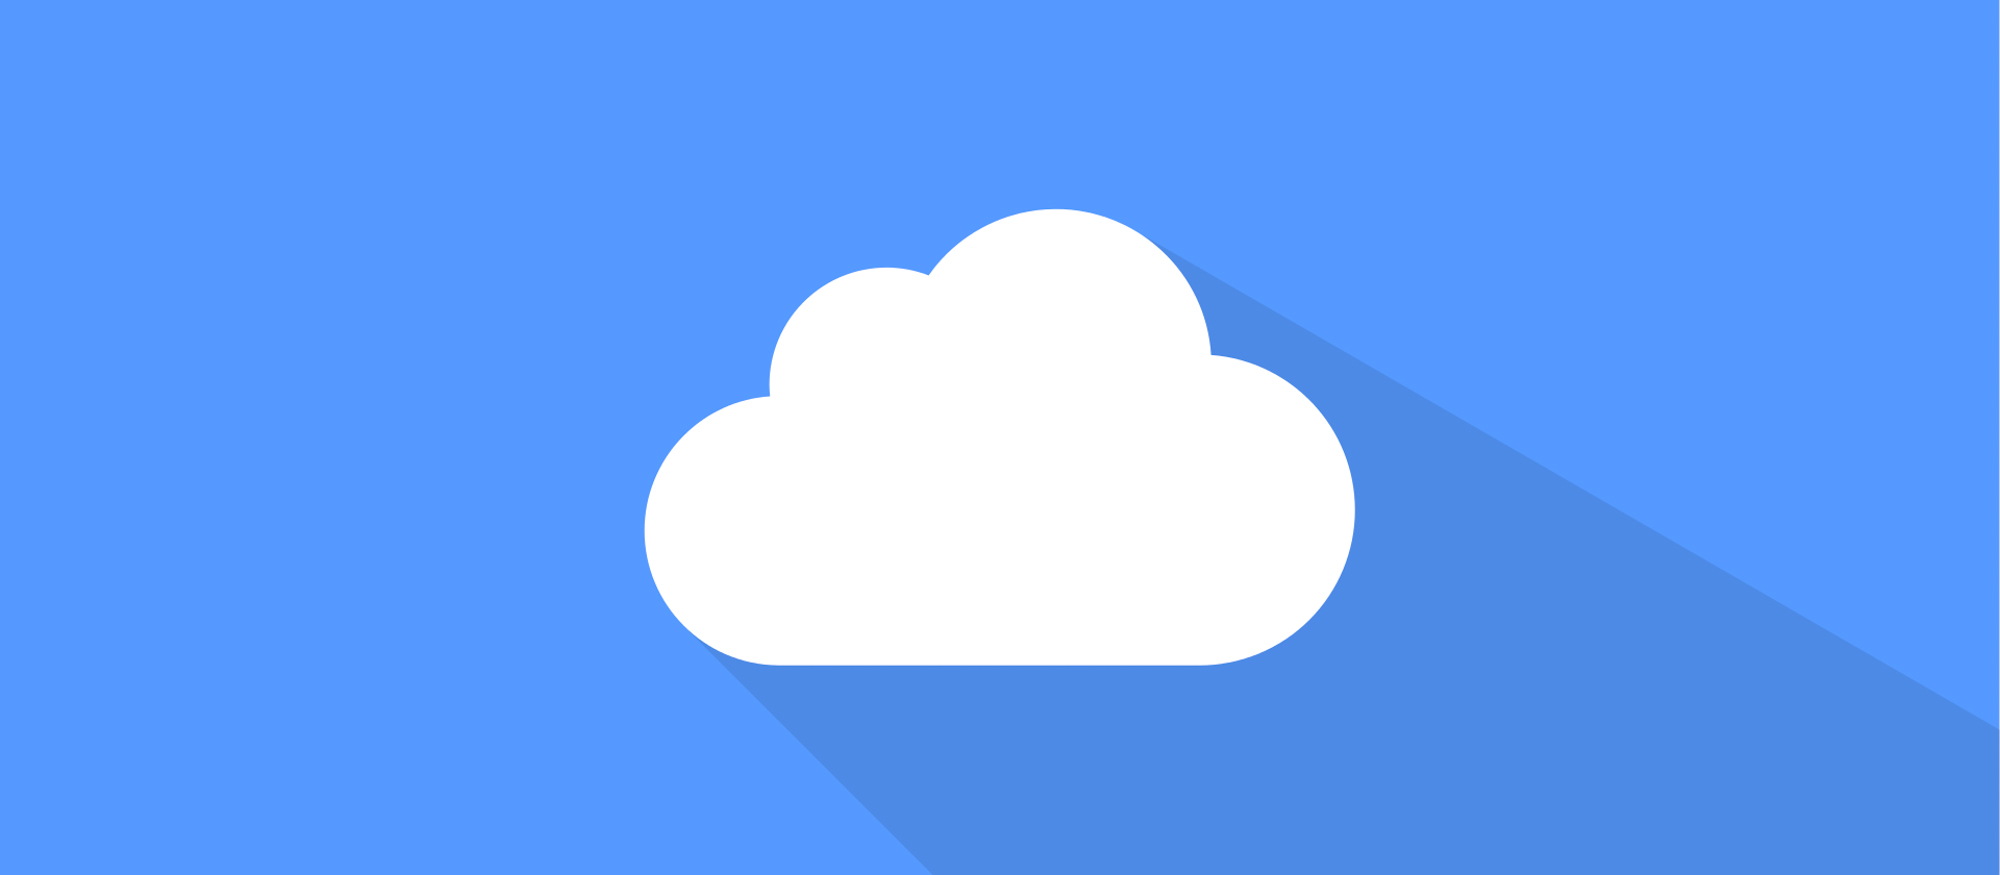 A simple cloud before a blue background